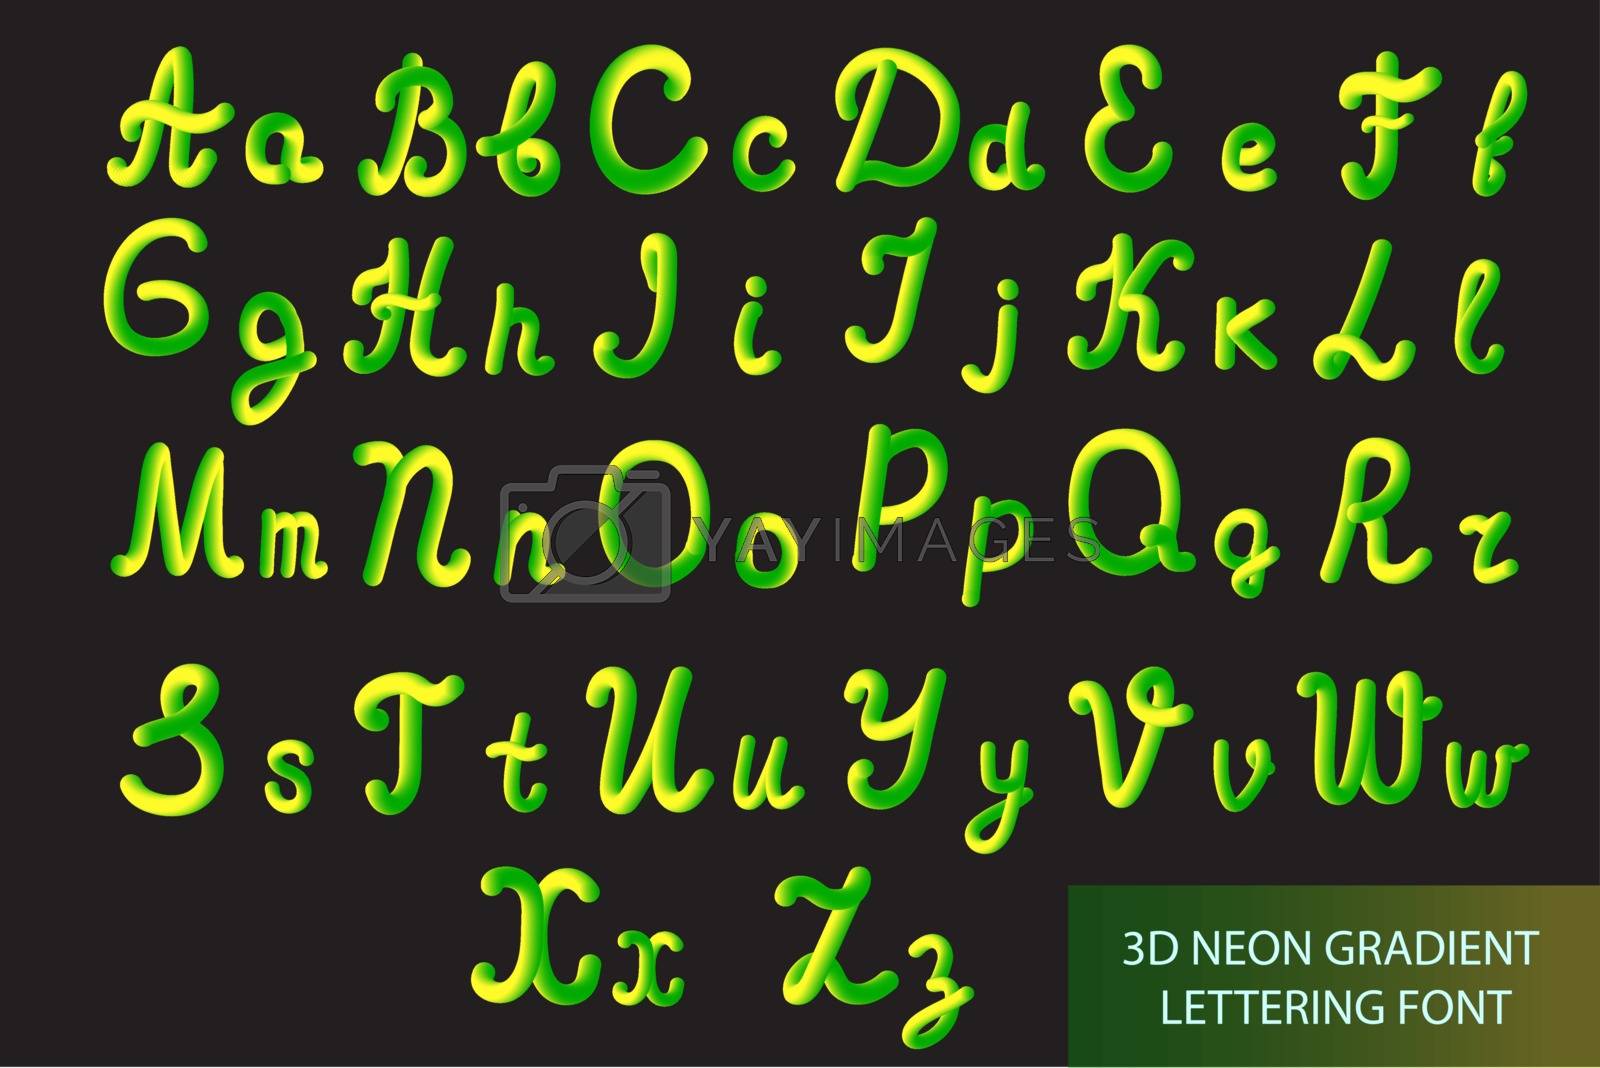 Royalty free image of Neon 3D Typeset with Rounded Shapes. Tube Hand-Drawn Lettering. Font Set of Painted Letters. Night Glow Effect or liquid. Trendy alphabet Latin letters from A to Z. Vector illustration. by lucia_fox